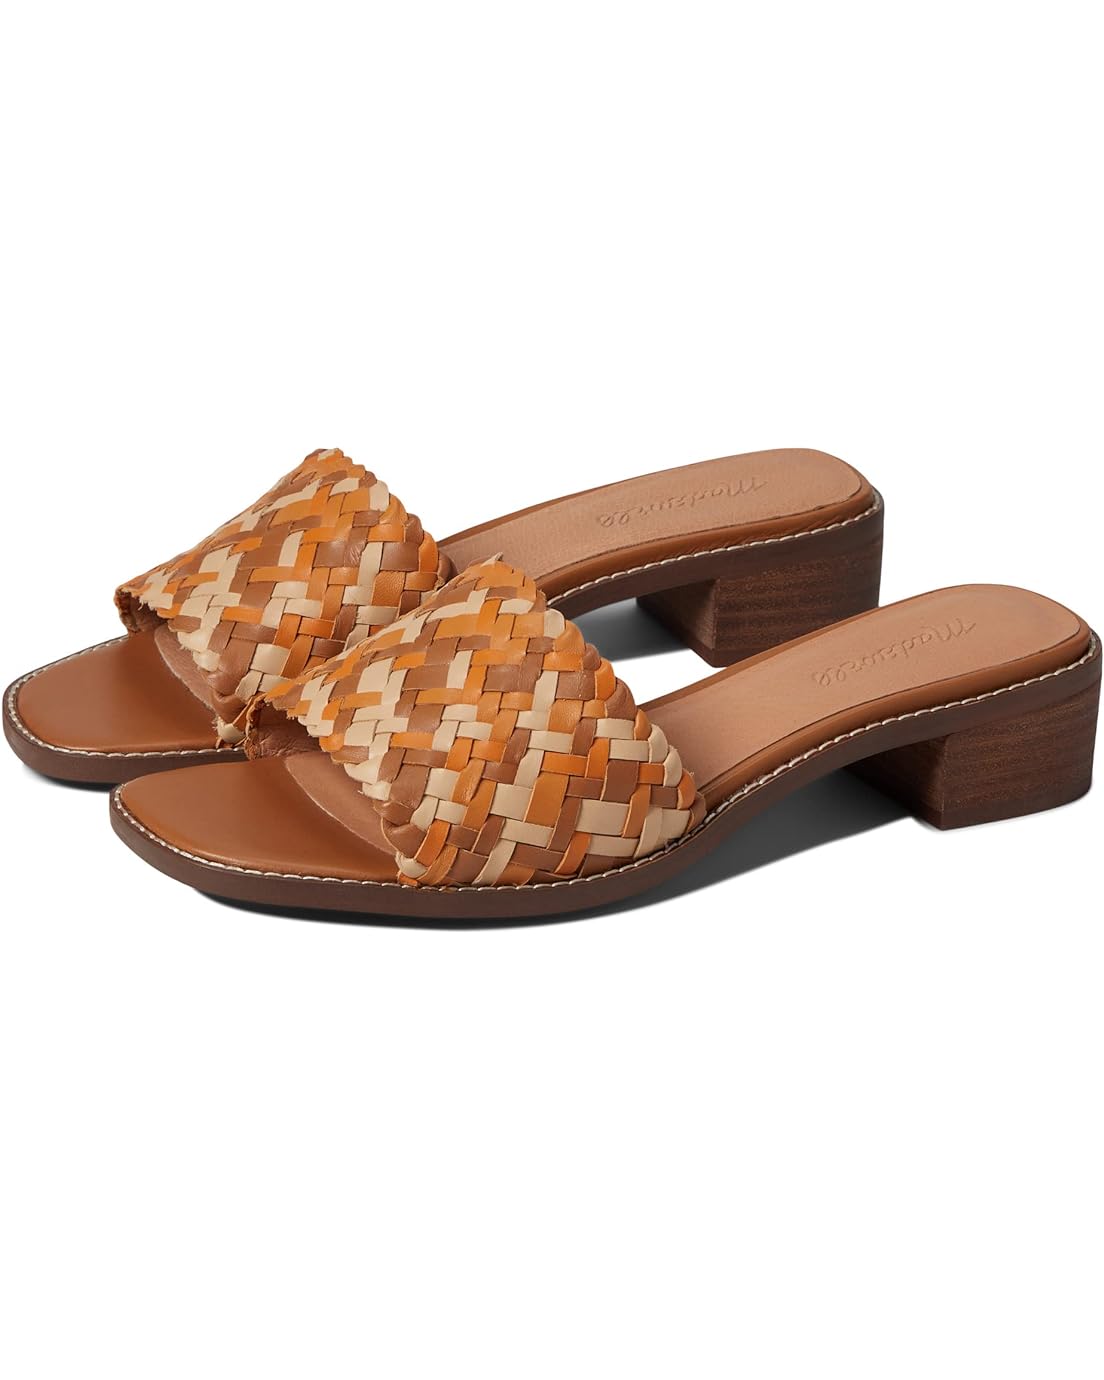 Madewell The Cassady Mule in Woven Leather